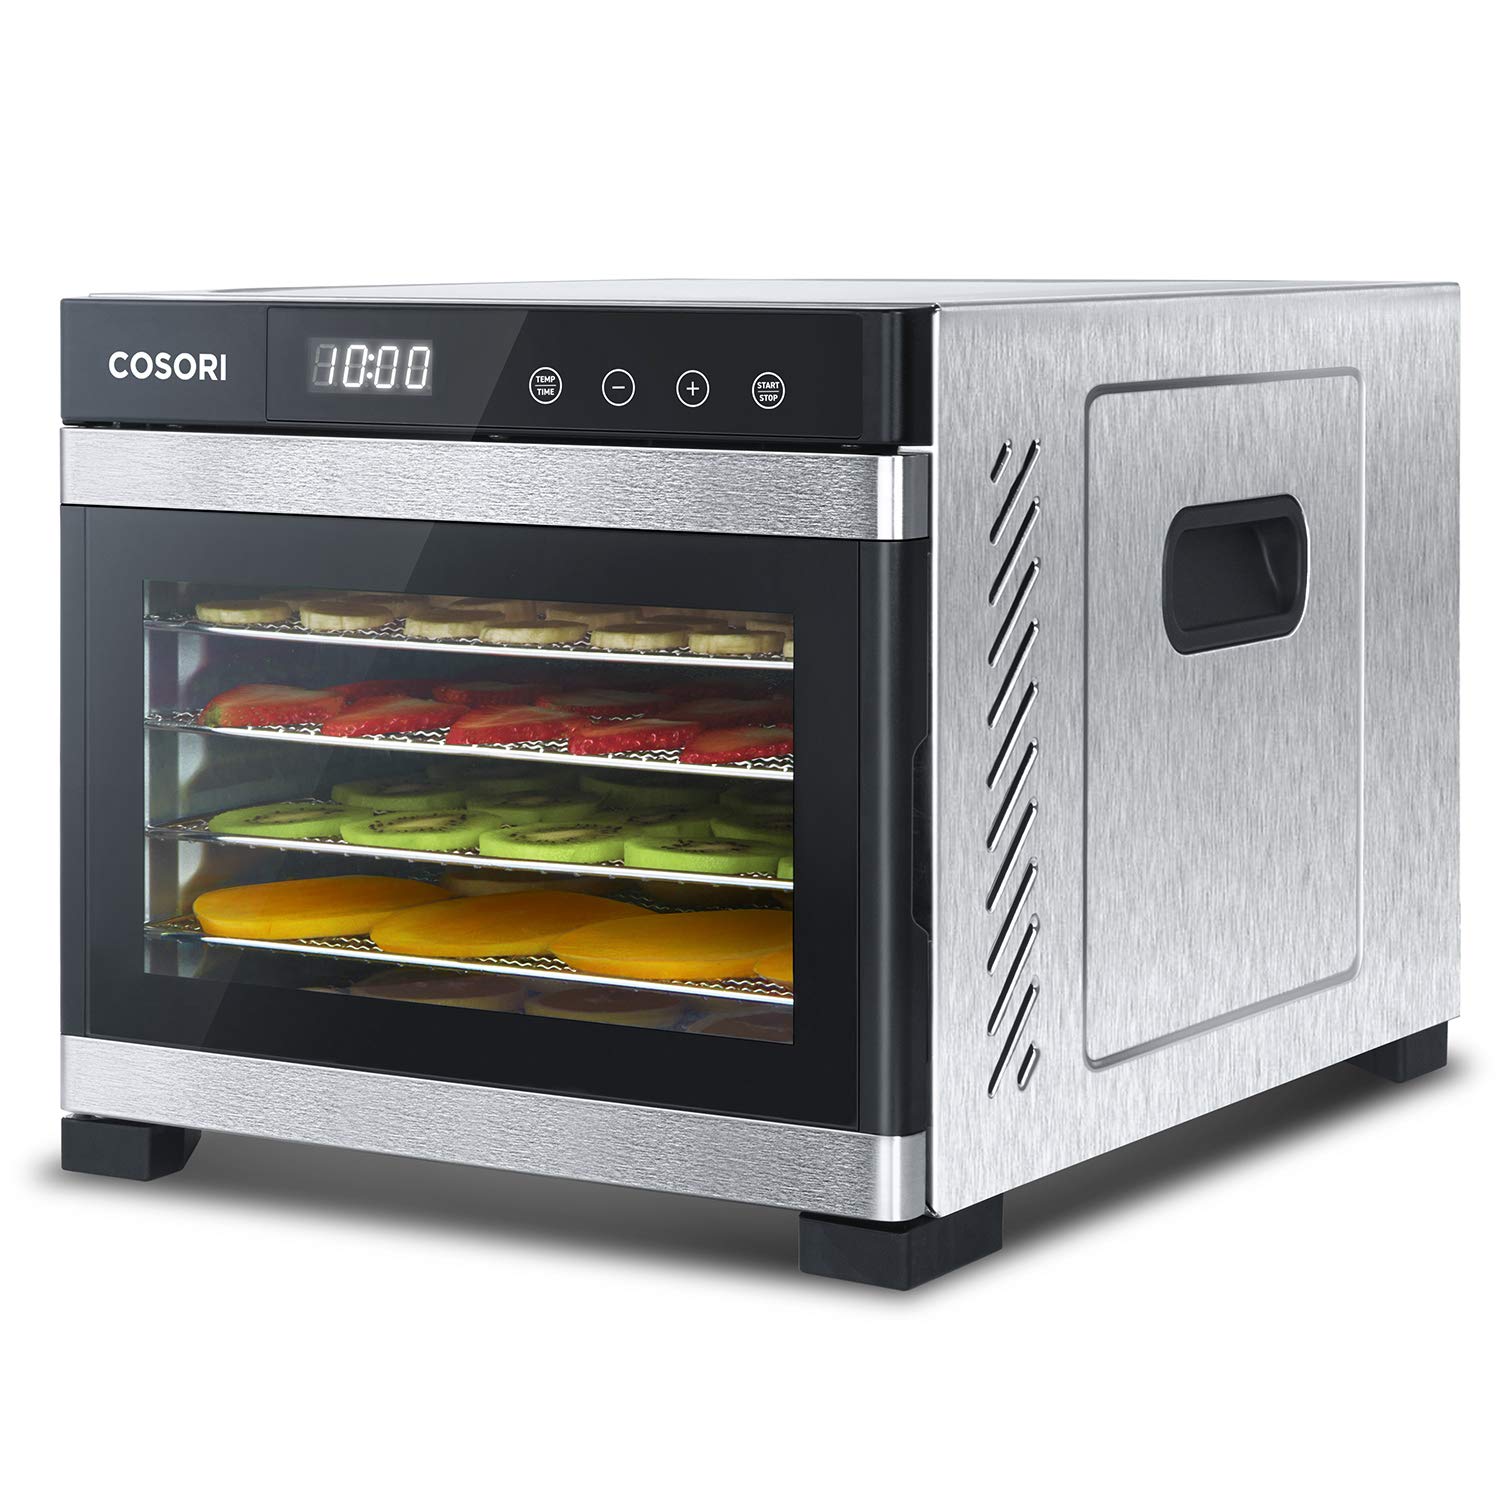 You are currently viewing COSORI Food Dehydrator, Stainless Steel Trays w/Digital Timer & Thermostat Preset